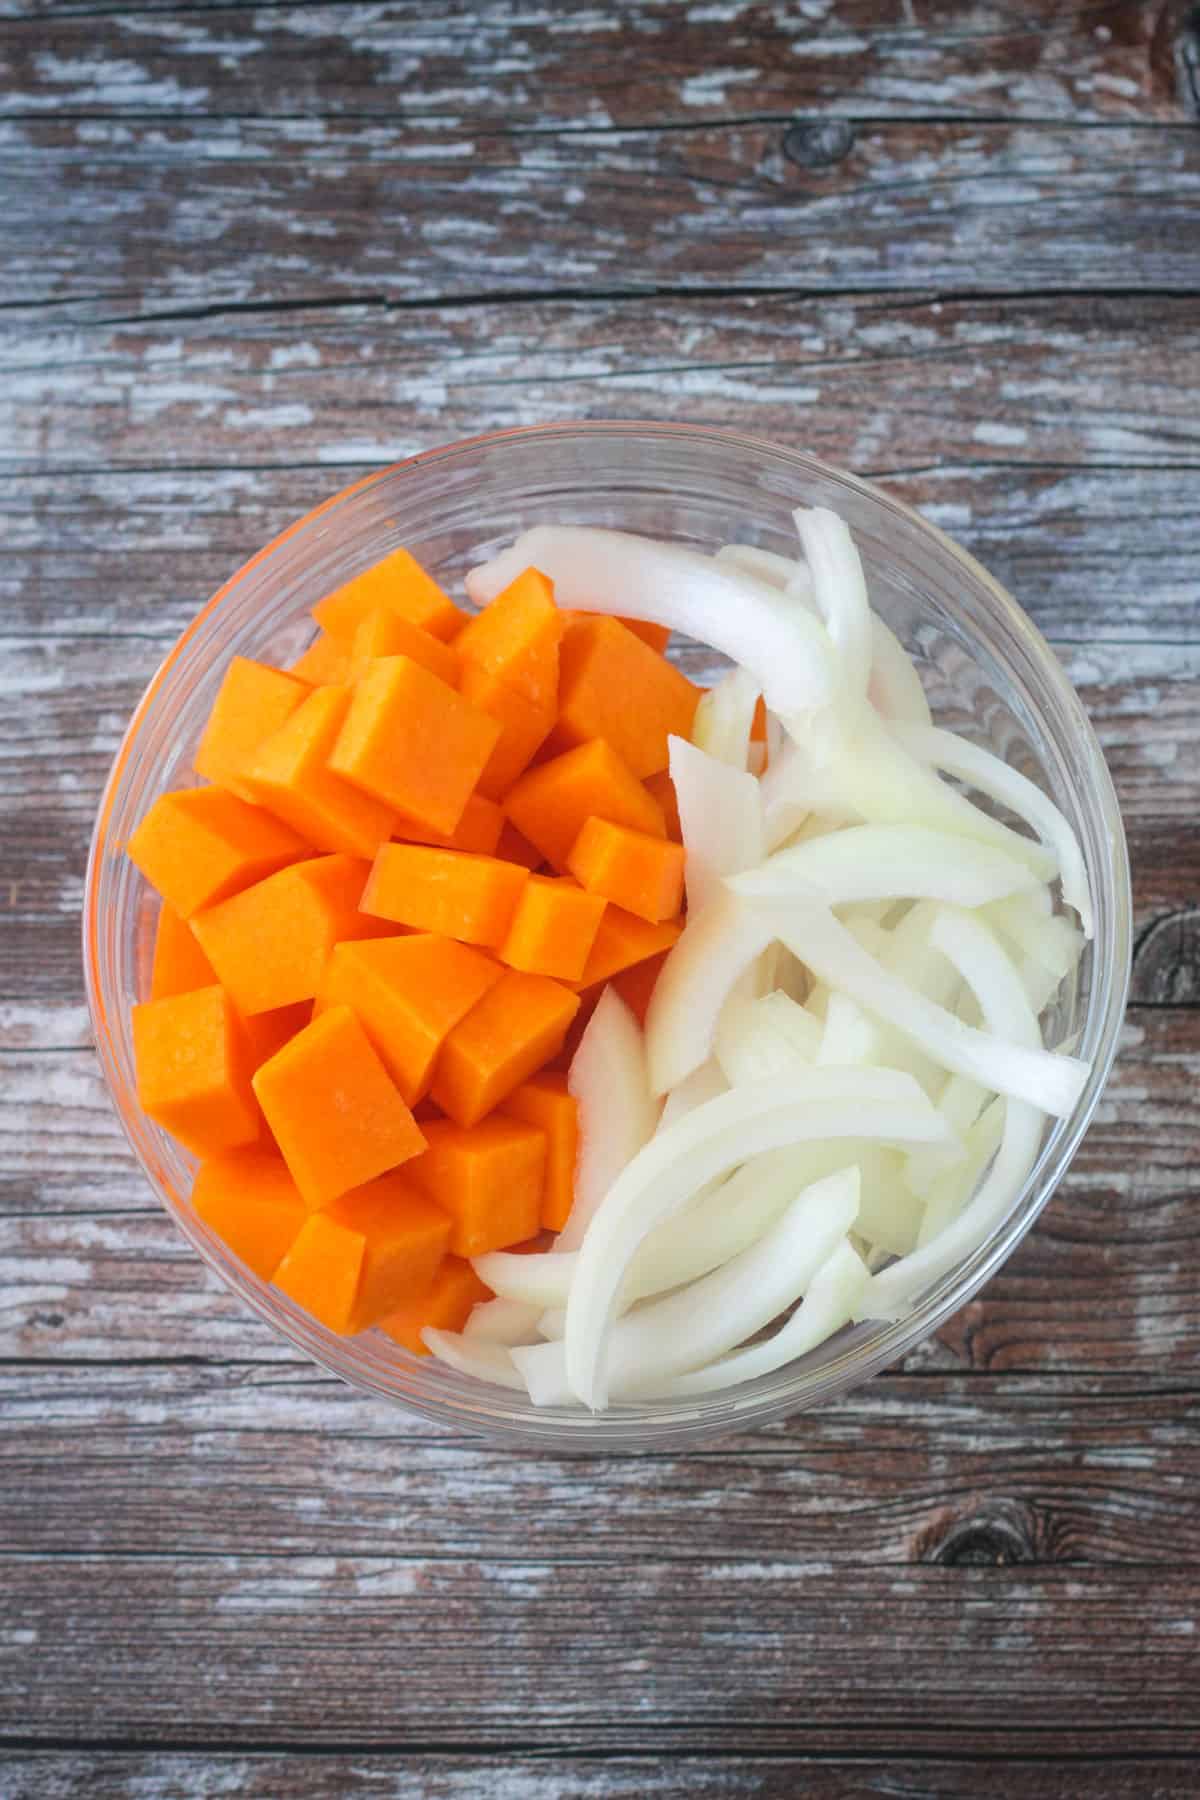 Diced squash and sliced onions in a bowl.